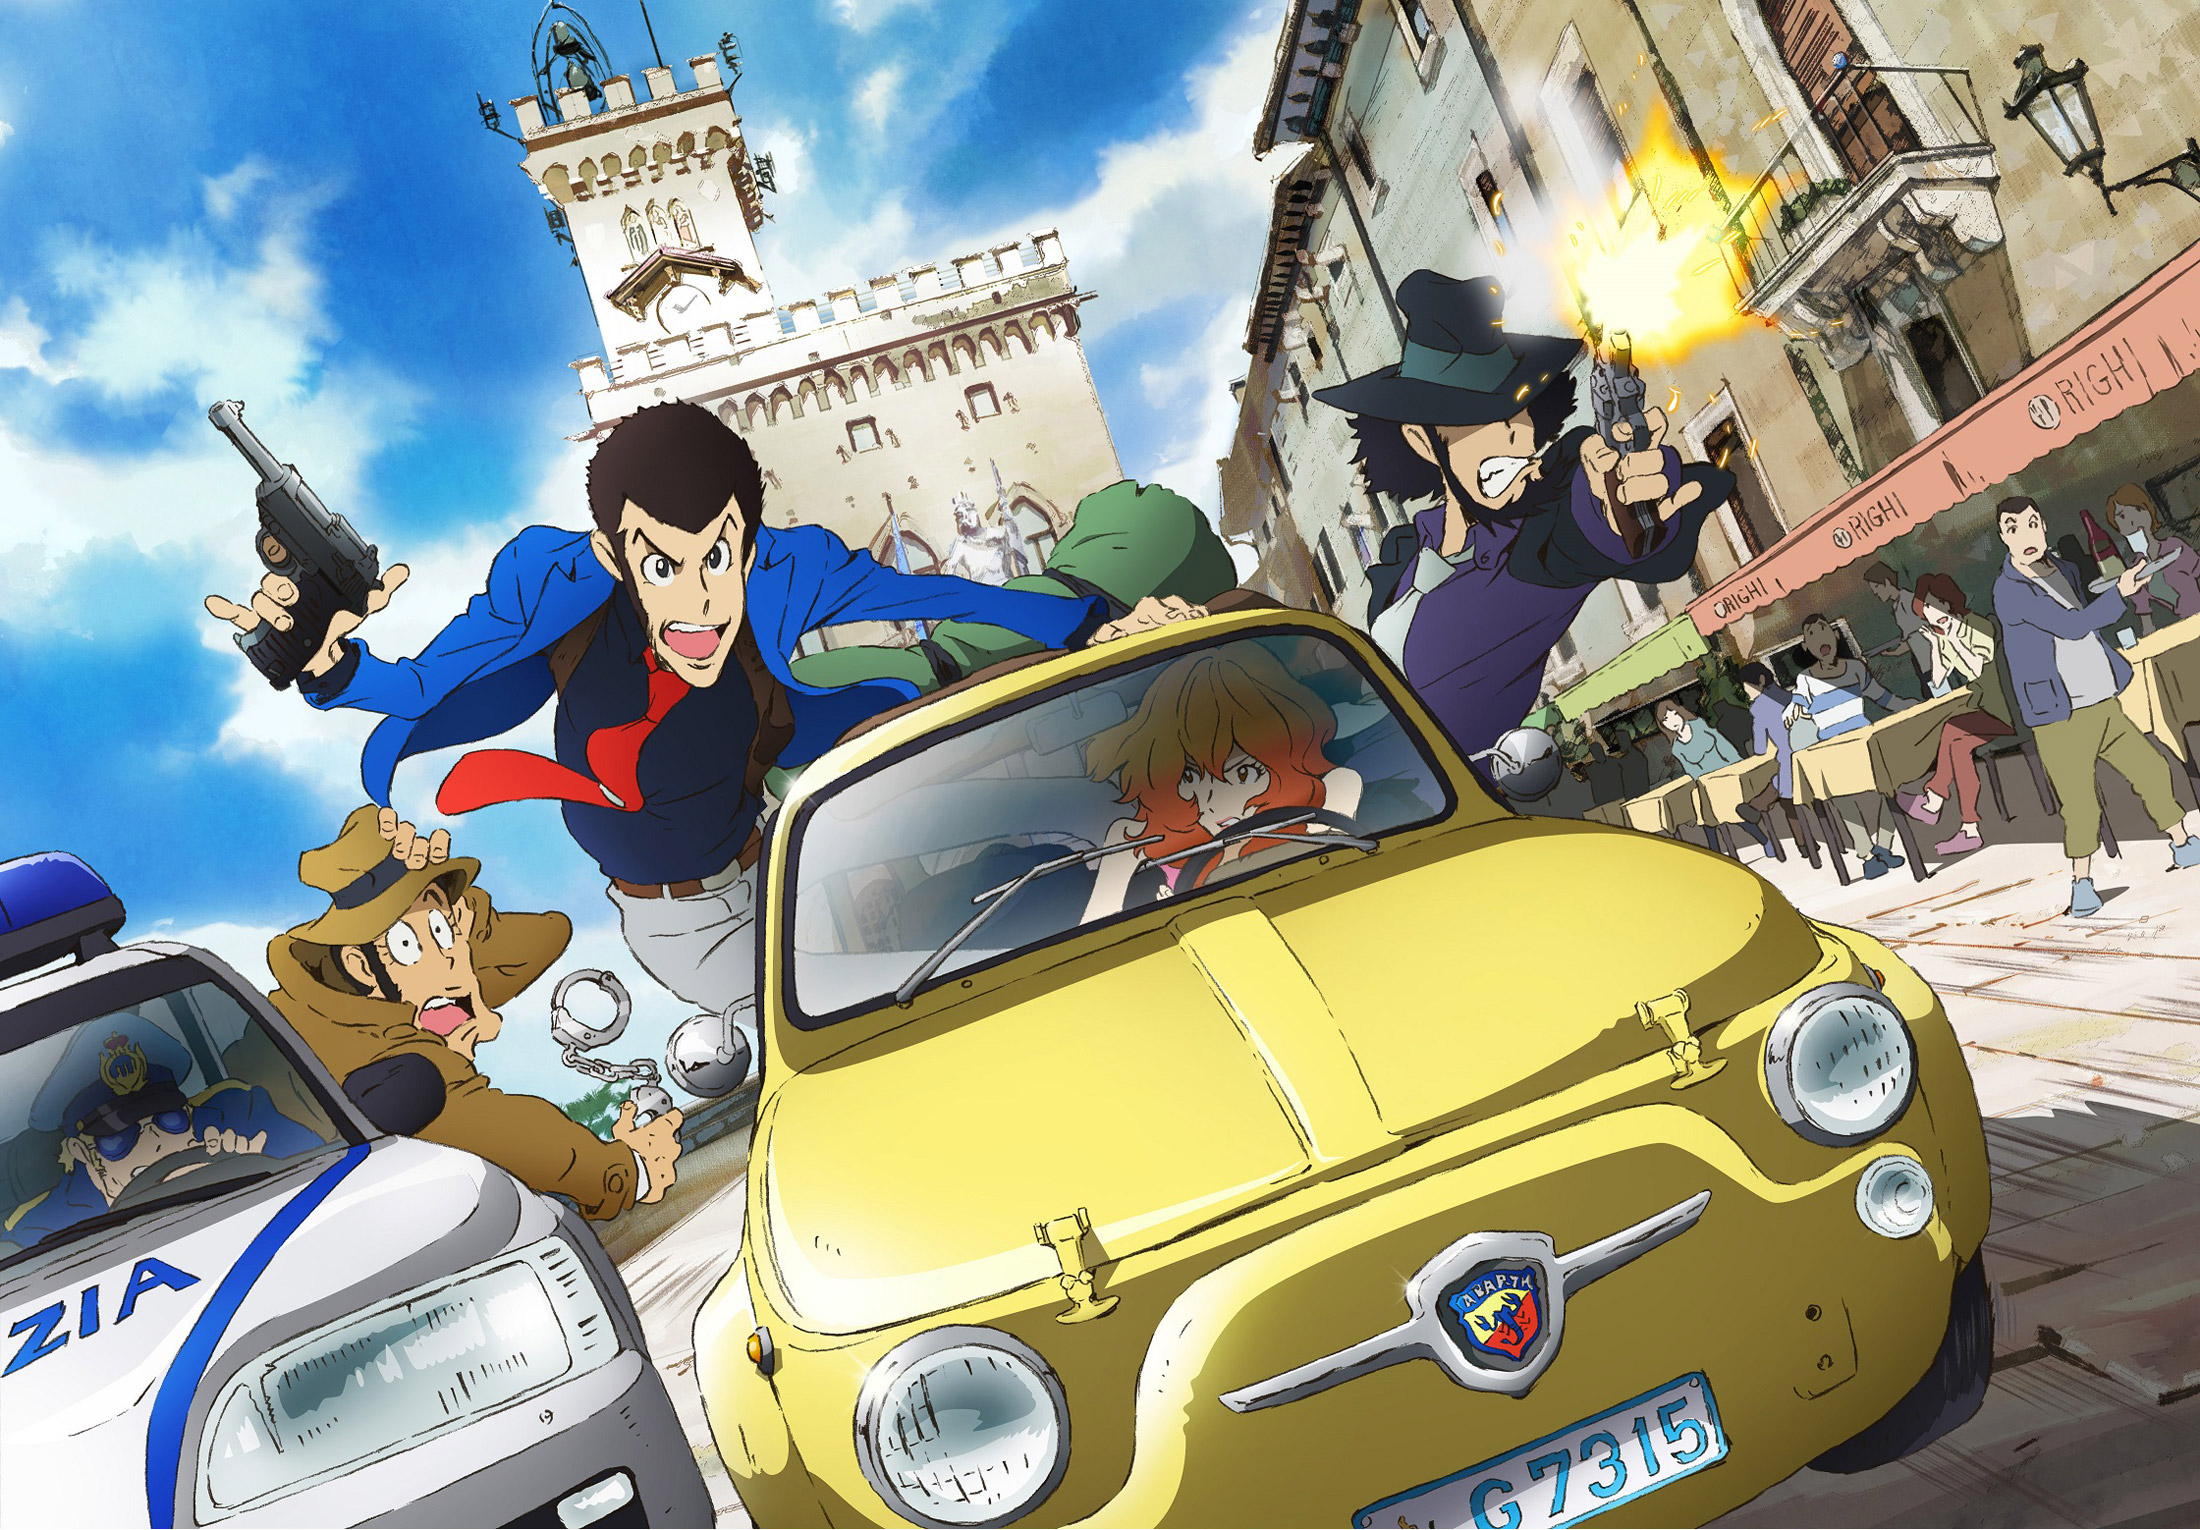 Lupin The Third #1